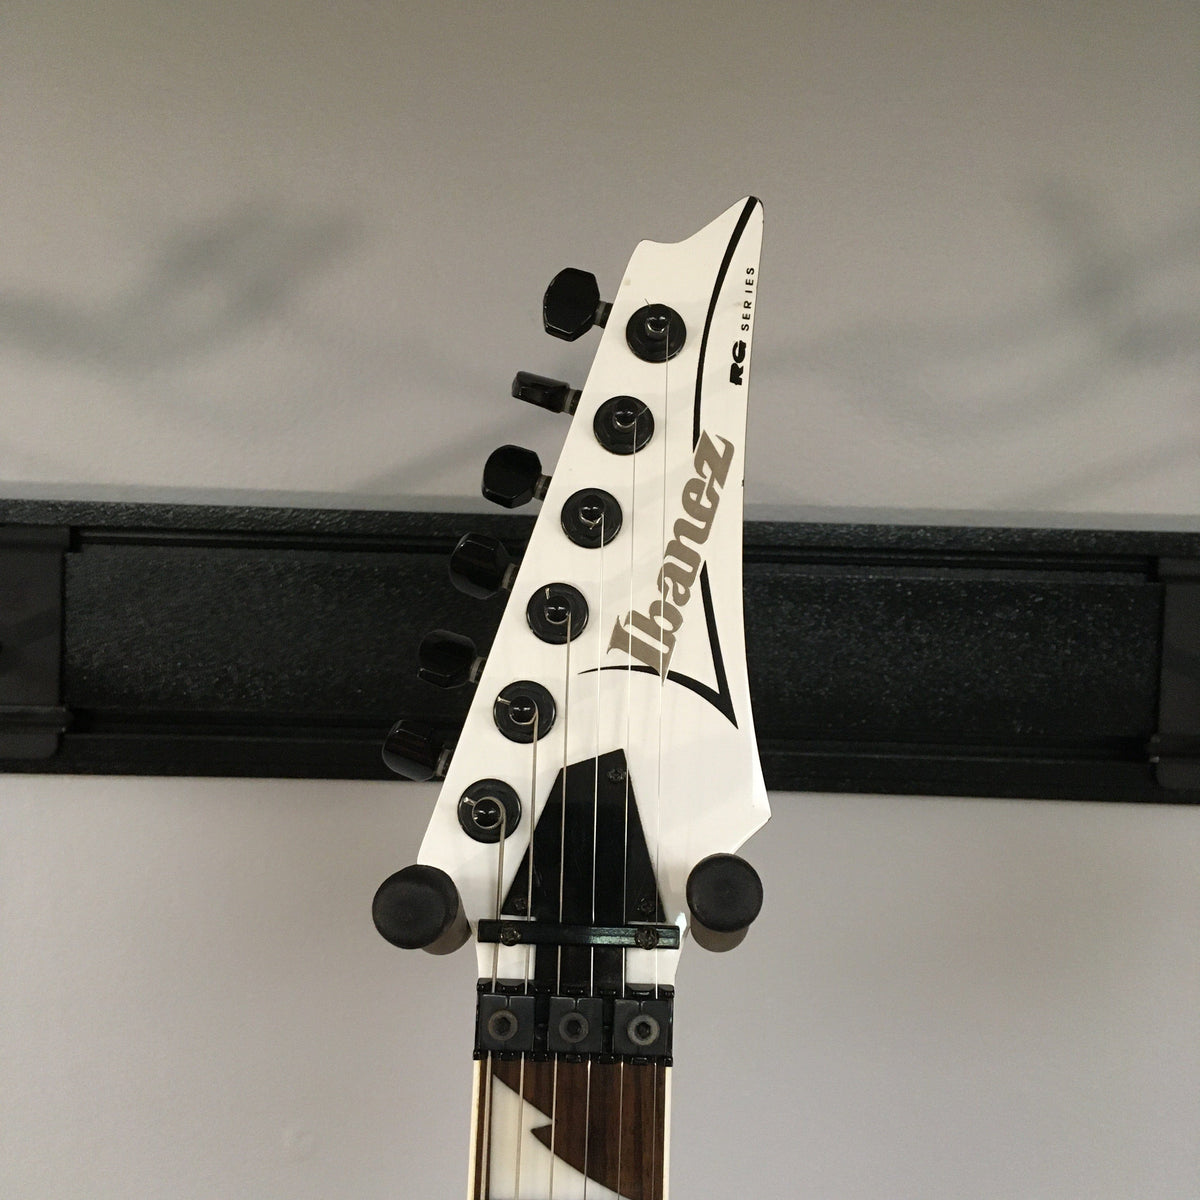 Ibanez RG350DX  White Used with Case